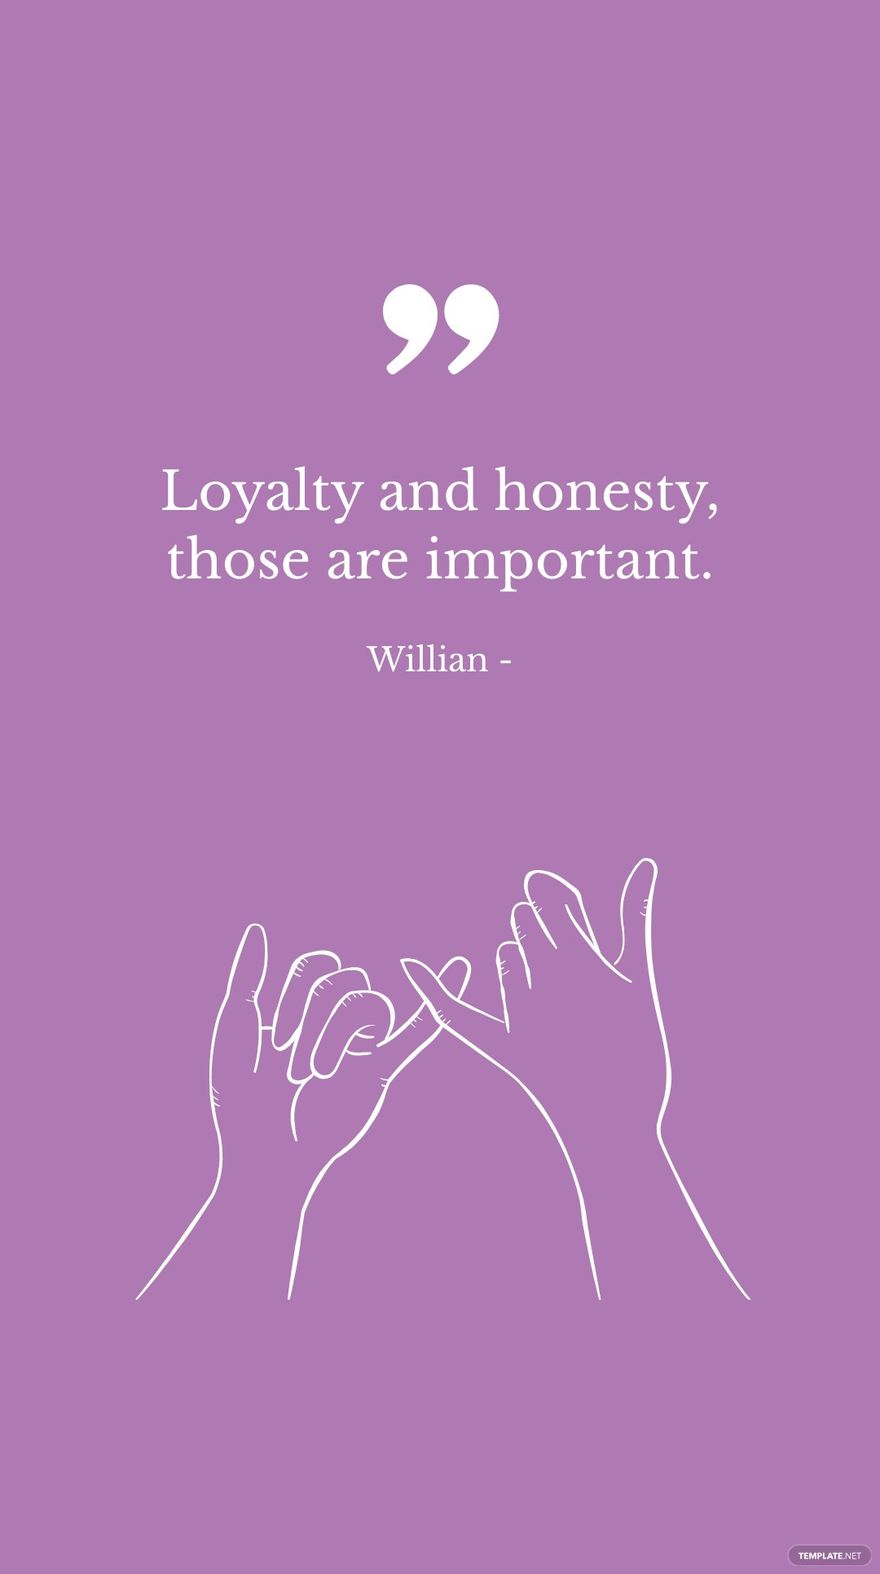 Willian - Loyalty and honesty, those are important. in JPG